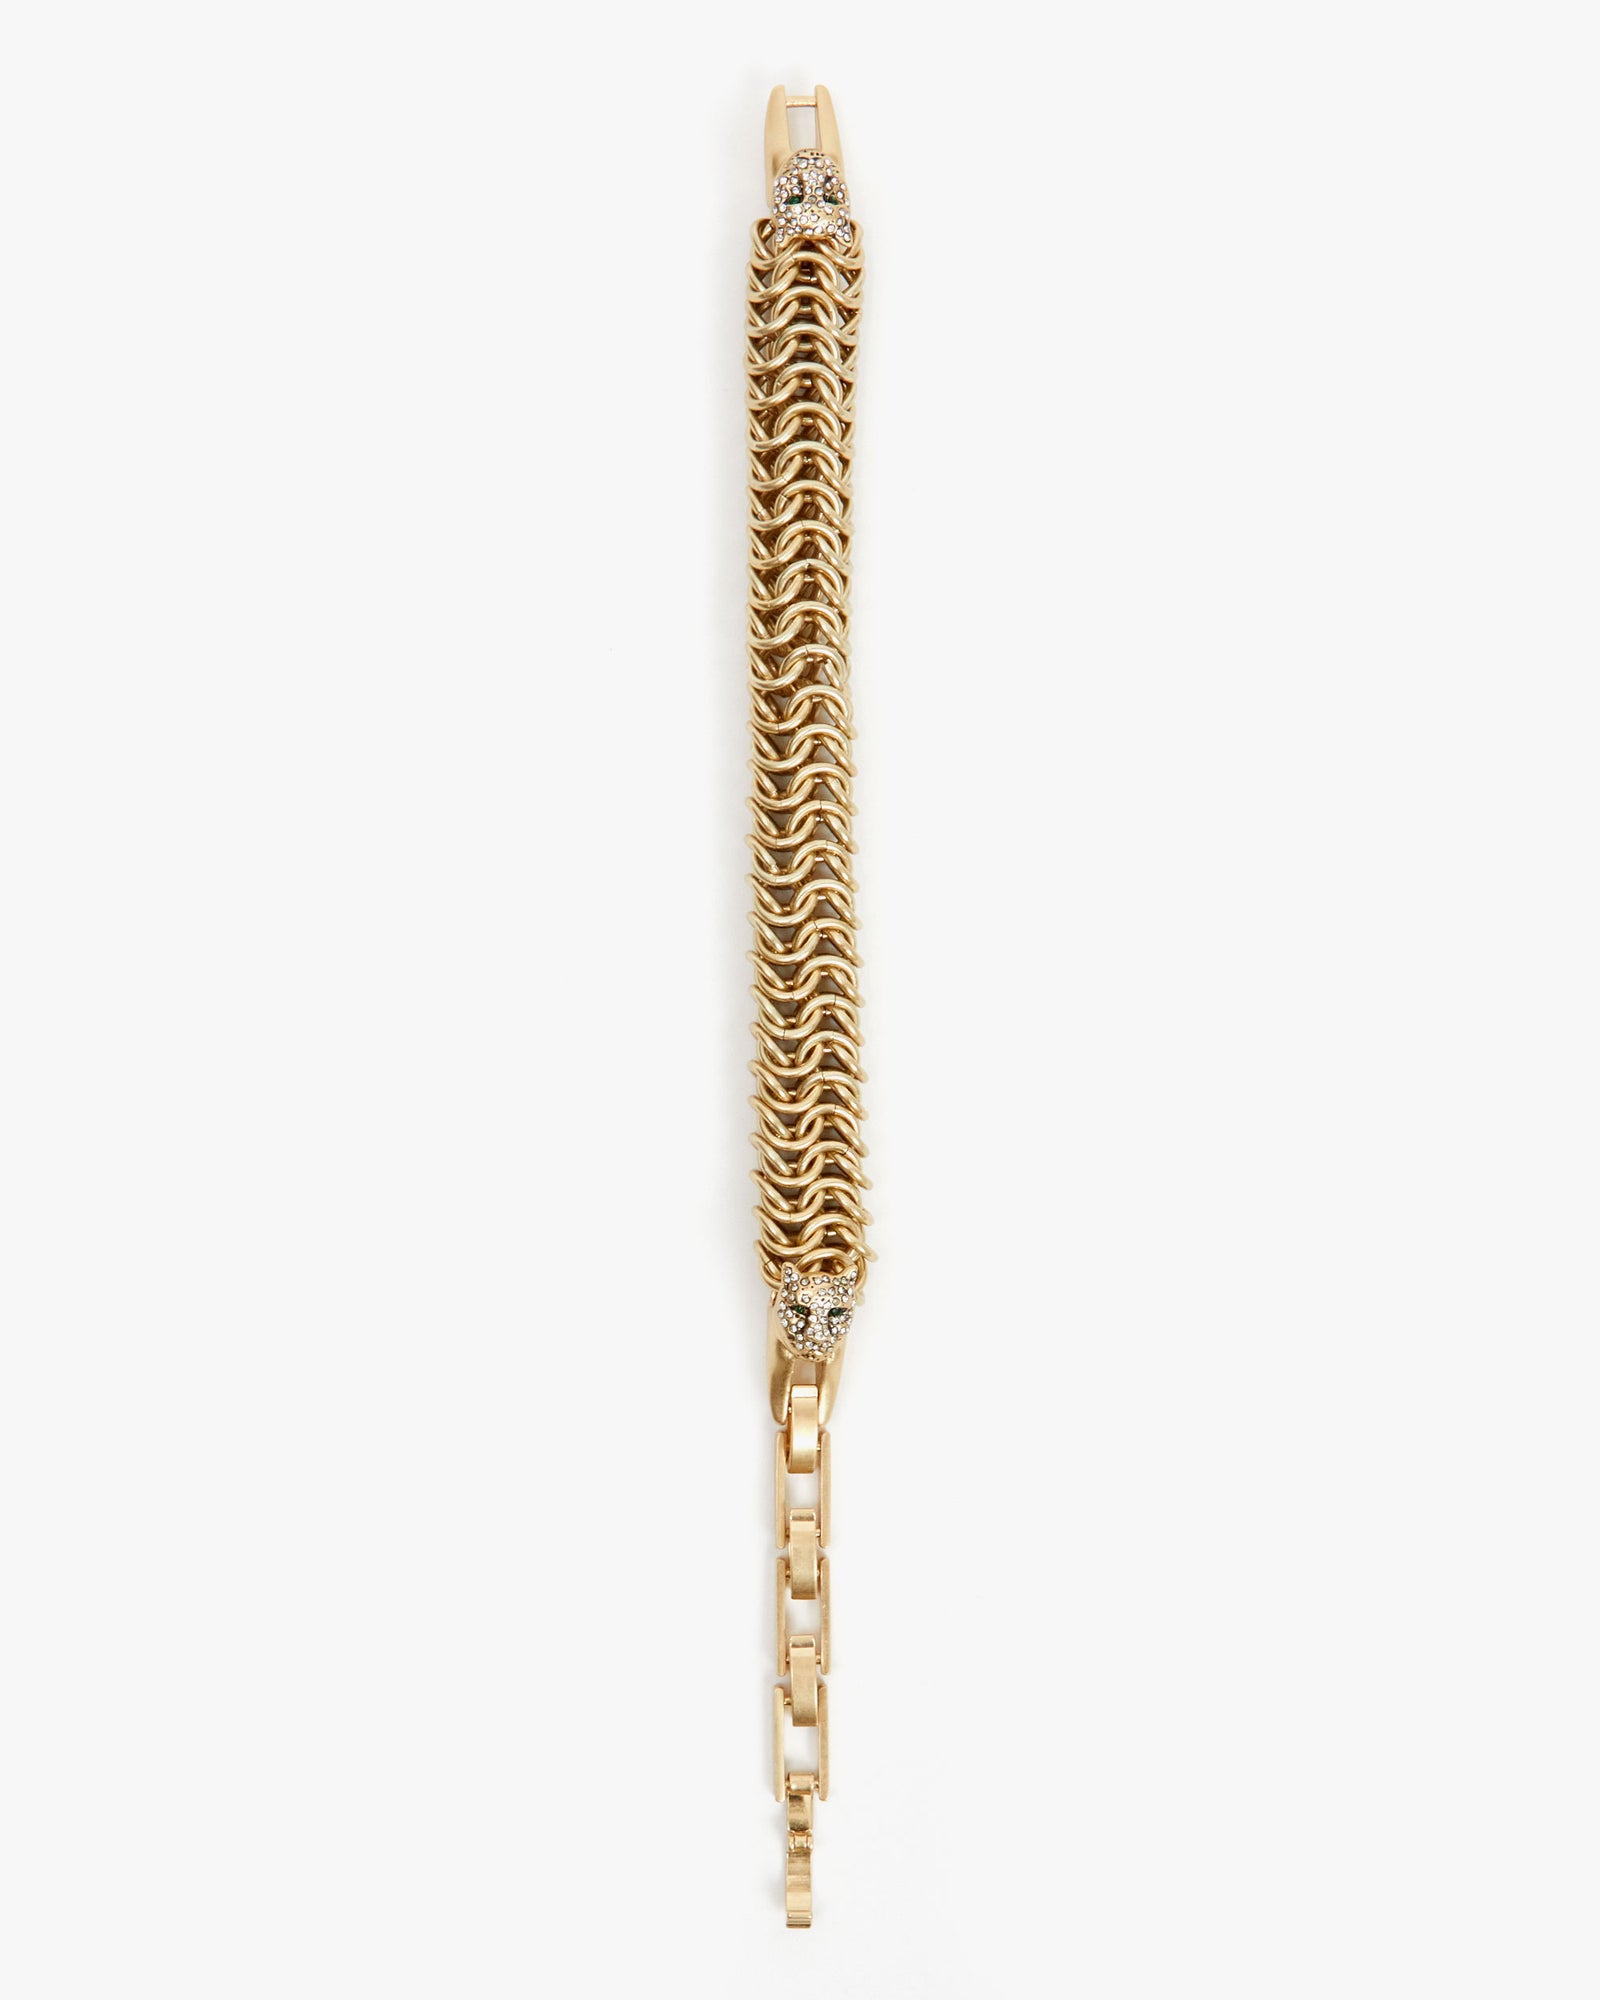 Vintage Gold Chain Statement Bracelet lain out flat on a white background